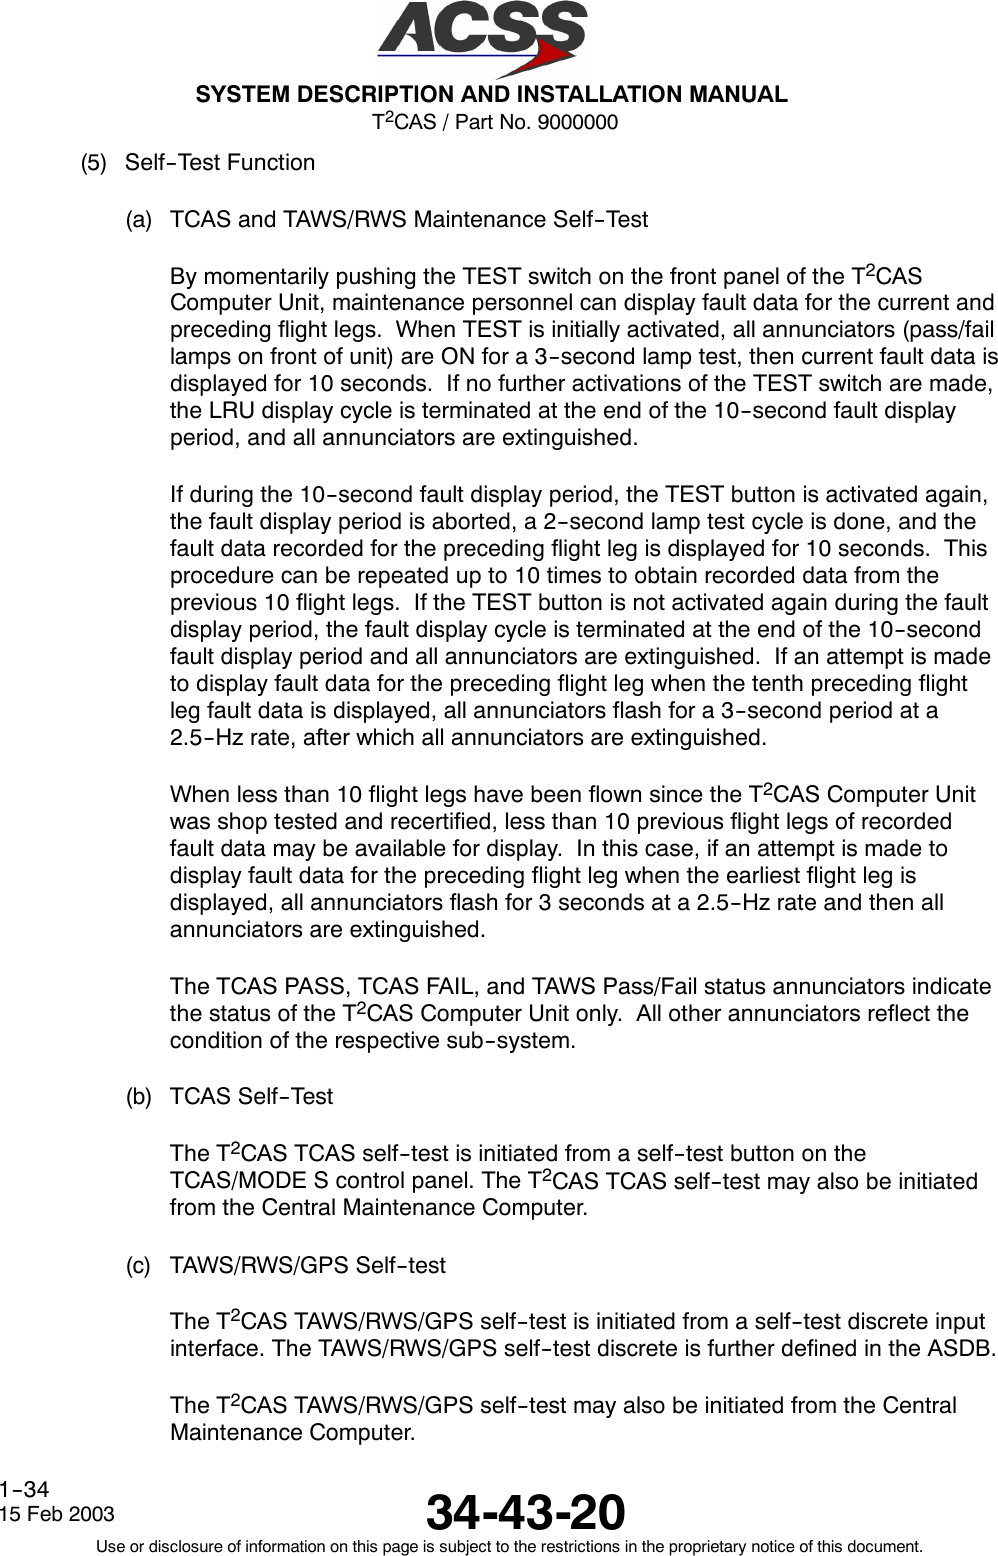 T2CAS / Part No. 9000000SYSTEM DESCRIPTION AND INSTALLATION MANUAL34-43-2015 Feb 2003Use or disclosure of information on this page is subject to the restrictions in the proprietary notice of this document.1--34(5) Self--Test Function(a) TCAS and TAWS/RWS Maintenance Self--TestBy momentarily pushing the TEST switch on the front panel of the T2CASComputer Unit, maintenance personnel can display fault data for the current andpreceding flight legs. When TEST is initially activated, all annunciators (pass/faillamps on front of unit) are ON for a 3--second lamp test, then current fault data isdisplayed for 10 seconds. If no further activations of the TEST switch are made,the LRU display cycle is terminated at the end of the 10--second fault displayperiod, and all annunciators are extinguished.If during the 10--second fault display period, the TEST button is activated again,the fault display period is aborted, a 2--second lamp test cycle is done, and thefault data recorded for the preceding flight leg is displayed for 10 seconds. Thisprocedure can be repeated up to 10 times to obtain recorded data from theprevious 10 flight legs. If the TEST button is not activated again during the faultdisplay period, the fault display cycle is terminated at the end of the 10--secondfault display period and all annunciators are extinguished. If an attempt is madeto display fault data for the preceding flight leg when the tenth preceding flightleg fault data is displayed, all annunciators flash for a 3--second period at a2.5--Hz rate, after which all annunciators are extinguished.When less than 10 flight legs have been flown since the T2CAS Computer Unitwas shop tested and recertified, less than 10 previous flight legs of recordedfault data may be available for display. In this case, if an attempt is made todisplay fault data for the preceding flight leg when the earliest flight leg isdisplayed, all annunciators flash for 3 seconds at a 2.5--Hz rate and then allannunciators are extinguished.The TCAS PASS, TCAS FAIL, and TAWS Pass/Fail status annunciators indicatethe status of the T2CAS Computer Unit only. All other annunciators reflect thecondition of the respective sub--system.(b) TCAS Self--TestThe T2CAS TCAS self--test is initiated from a self--test button on theTCAS/MODE S control panel. The T2CAS TCAS self--test may also be initiatedfrom the Central Maintenance Computer.(c) TAWS/RWS/GPS Self--testThe T2CAS TAWS/RWS/GPS self--test is initiated from a self--test discrete inputinterface. The TAWS/RWS/GPS self--test discrete is further defined in the ASDB.The T2CAS TAWS/RWS/GPS self--test may also be initiated from the CentralMaintenance Computer.